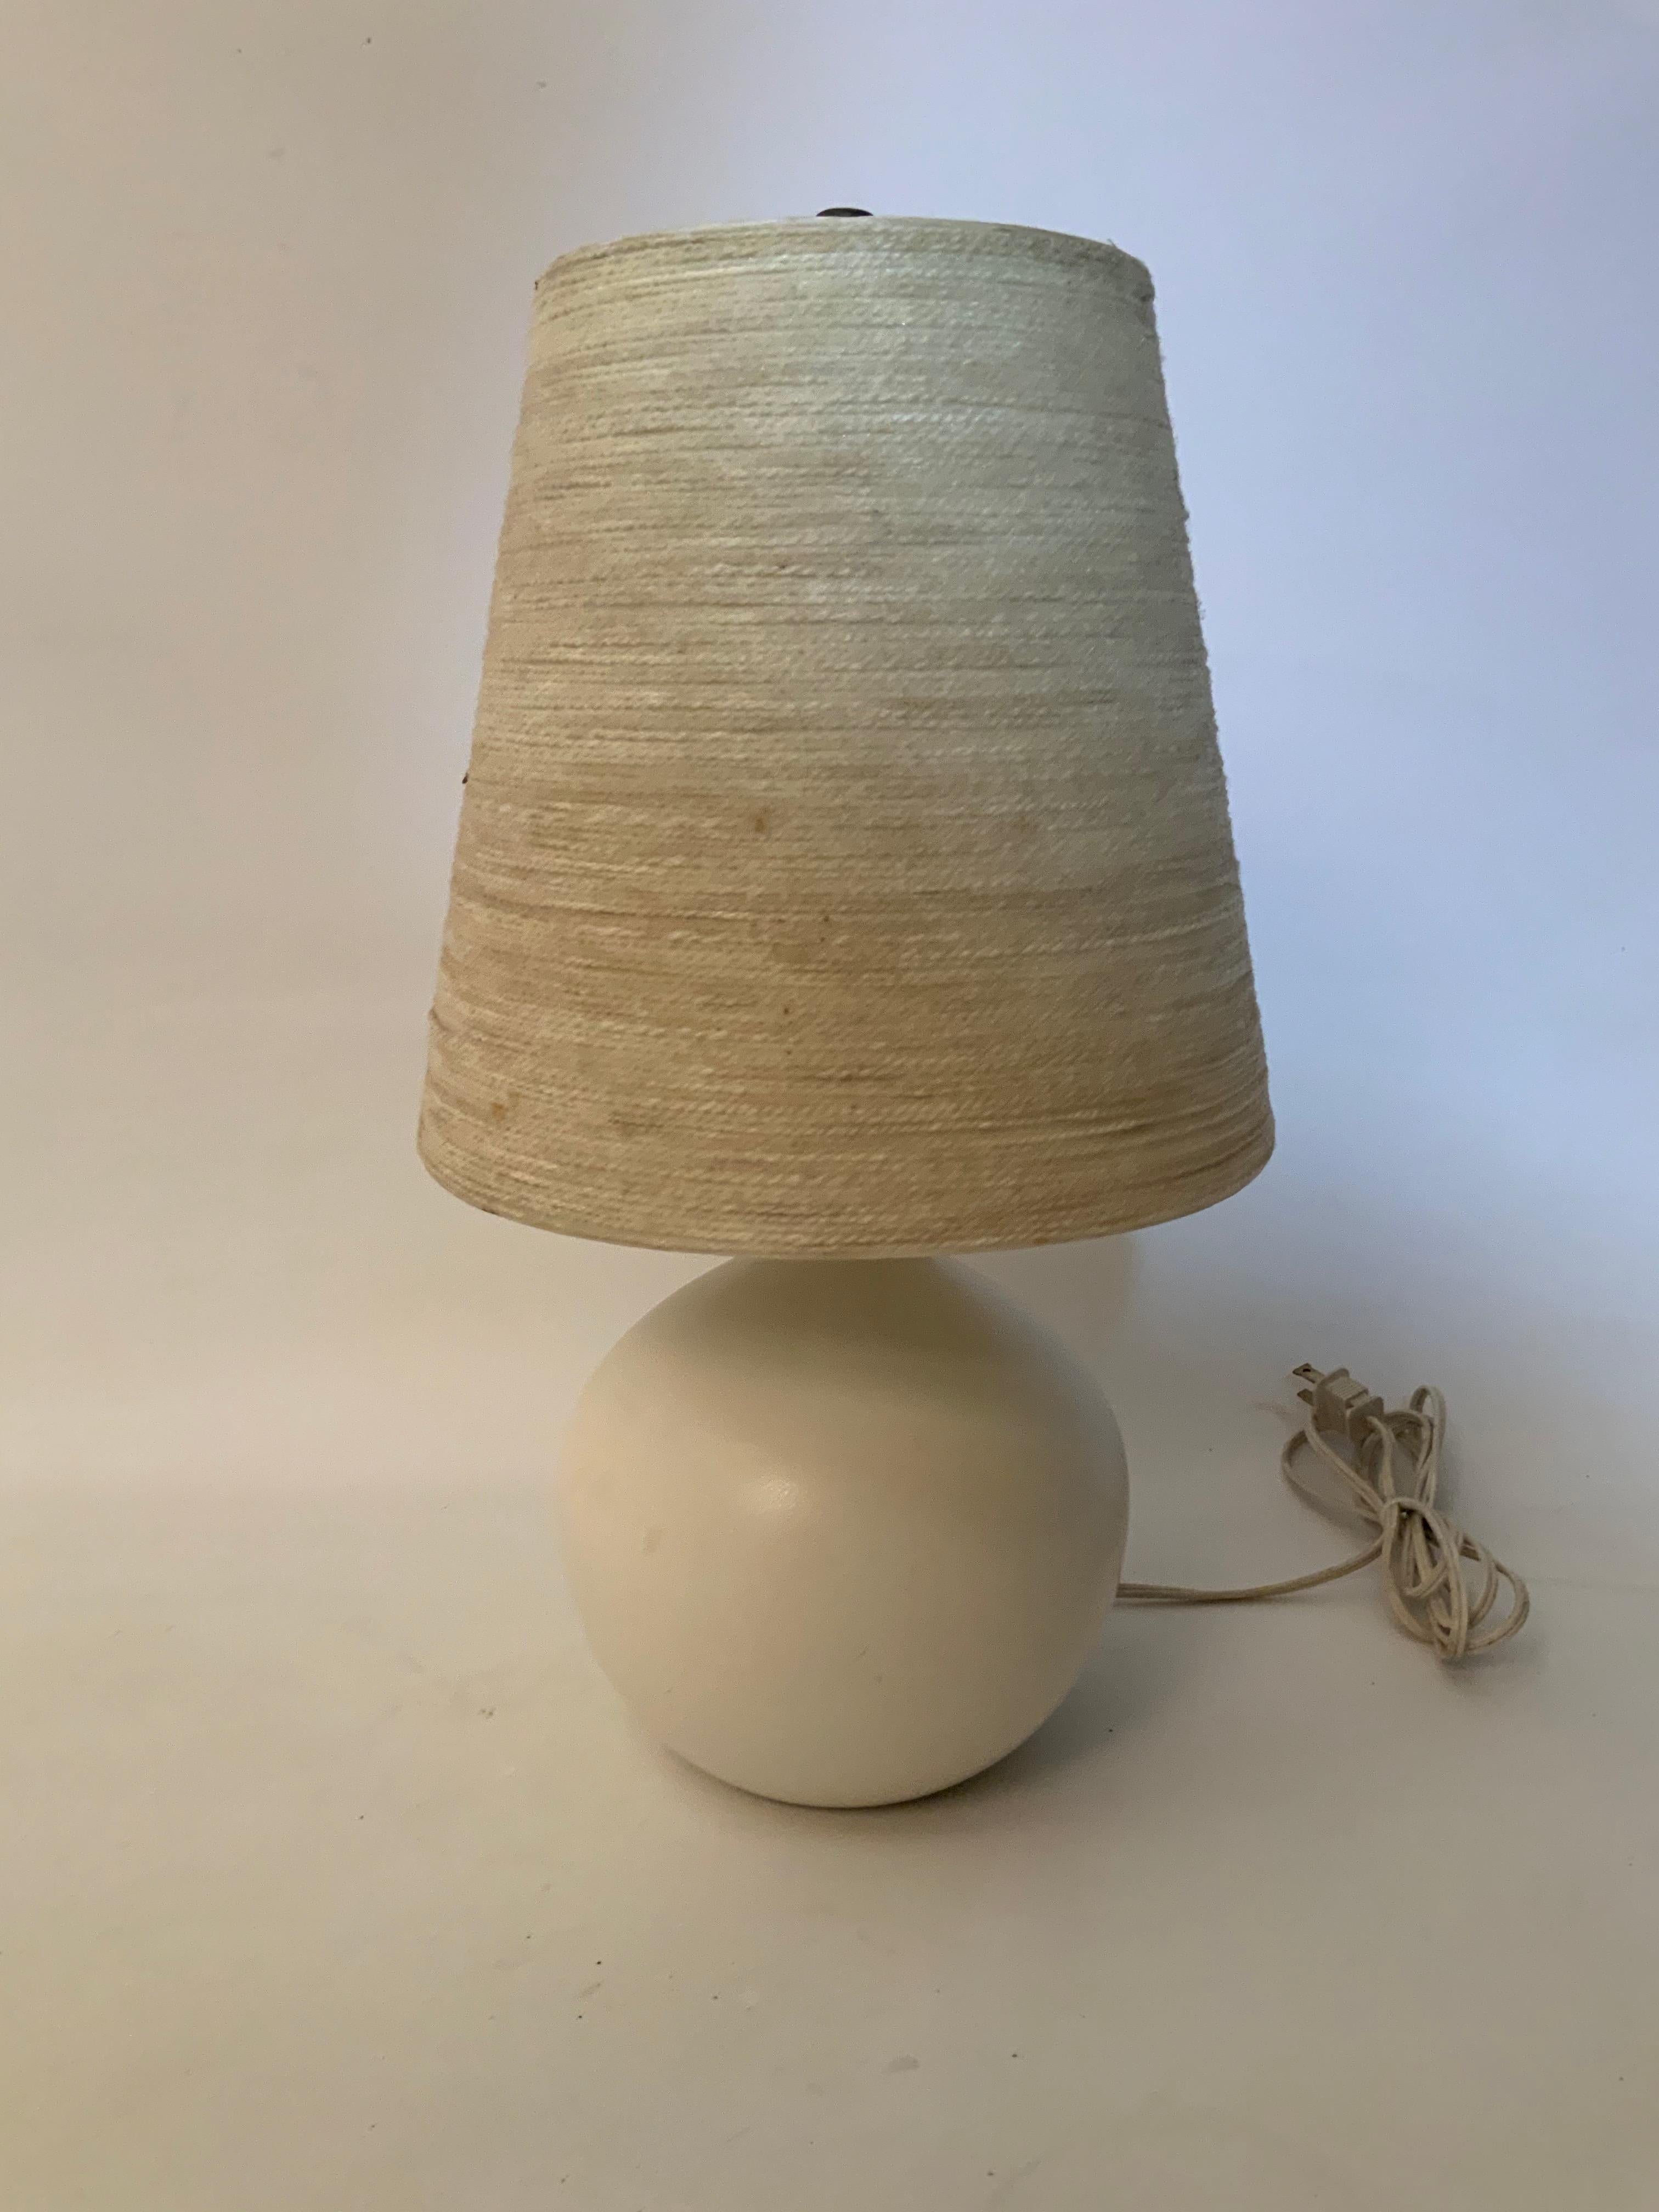 White eggshell finish ceramic table lamp with the original fiberglass shade. Signed with paper label, Bostlund Industries, circa 1960. Very good condition. Felted bottom. Original wiring in good working condition. 

Approximate overall height from